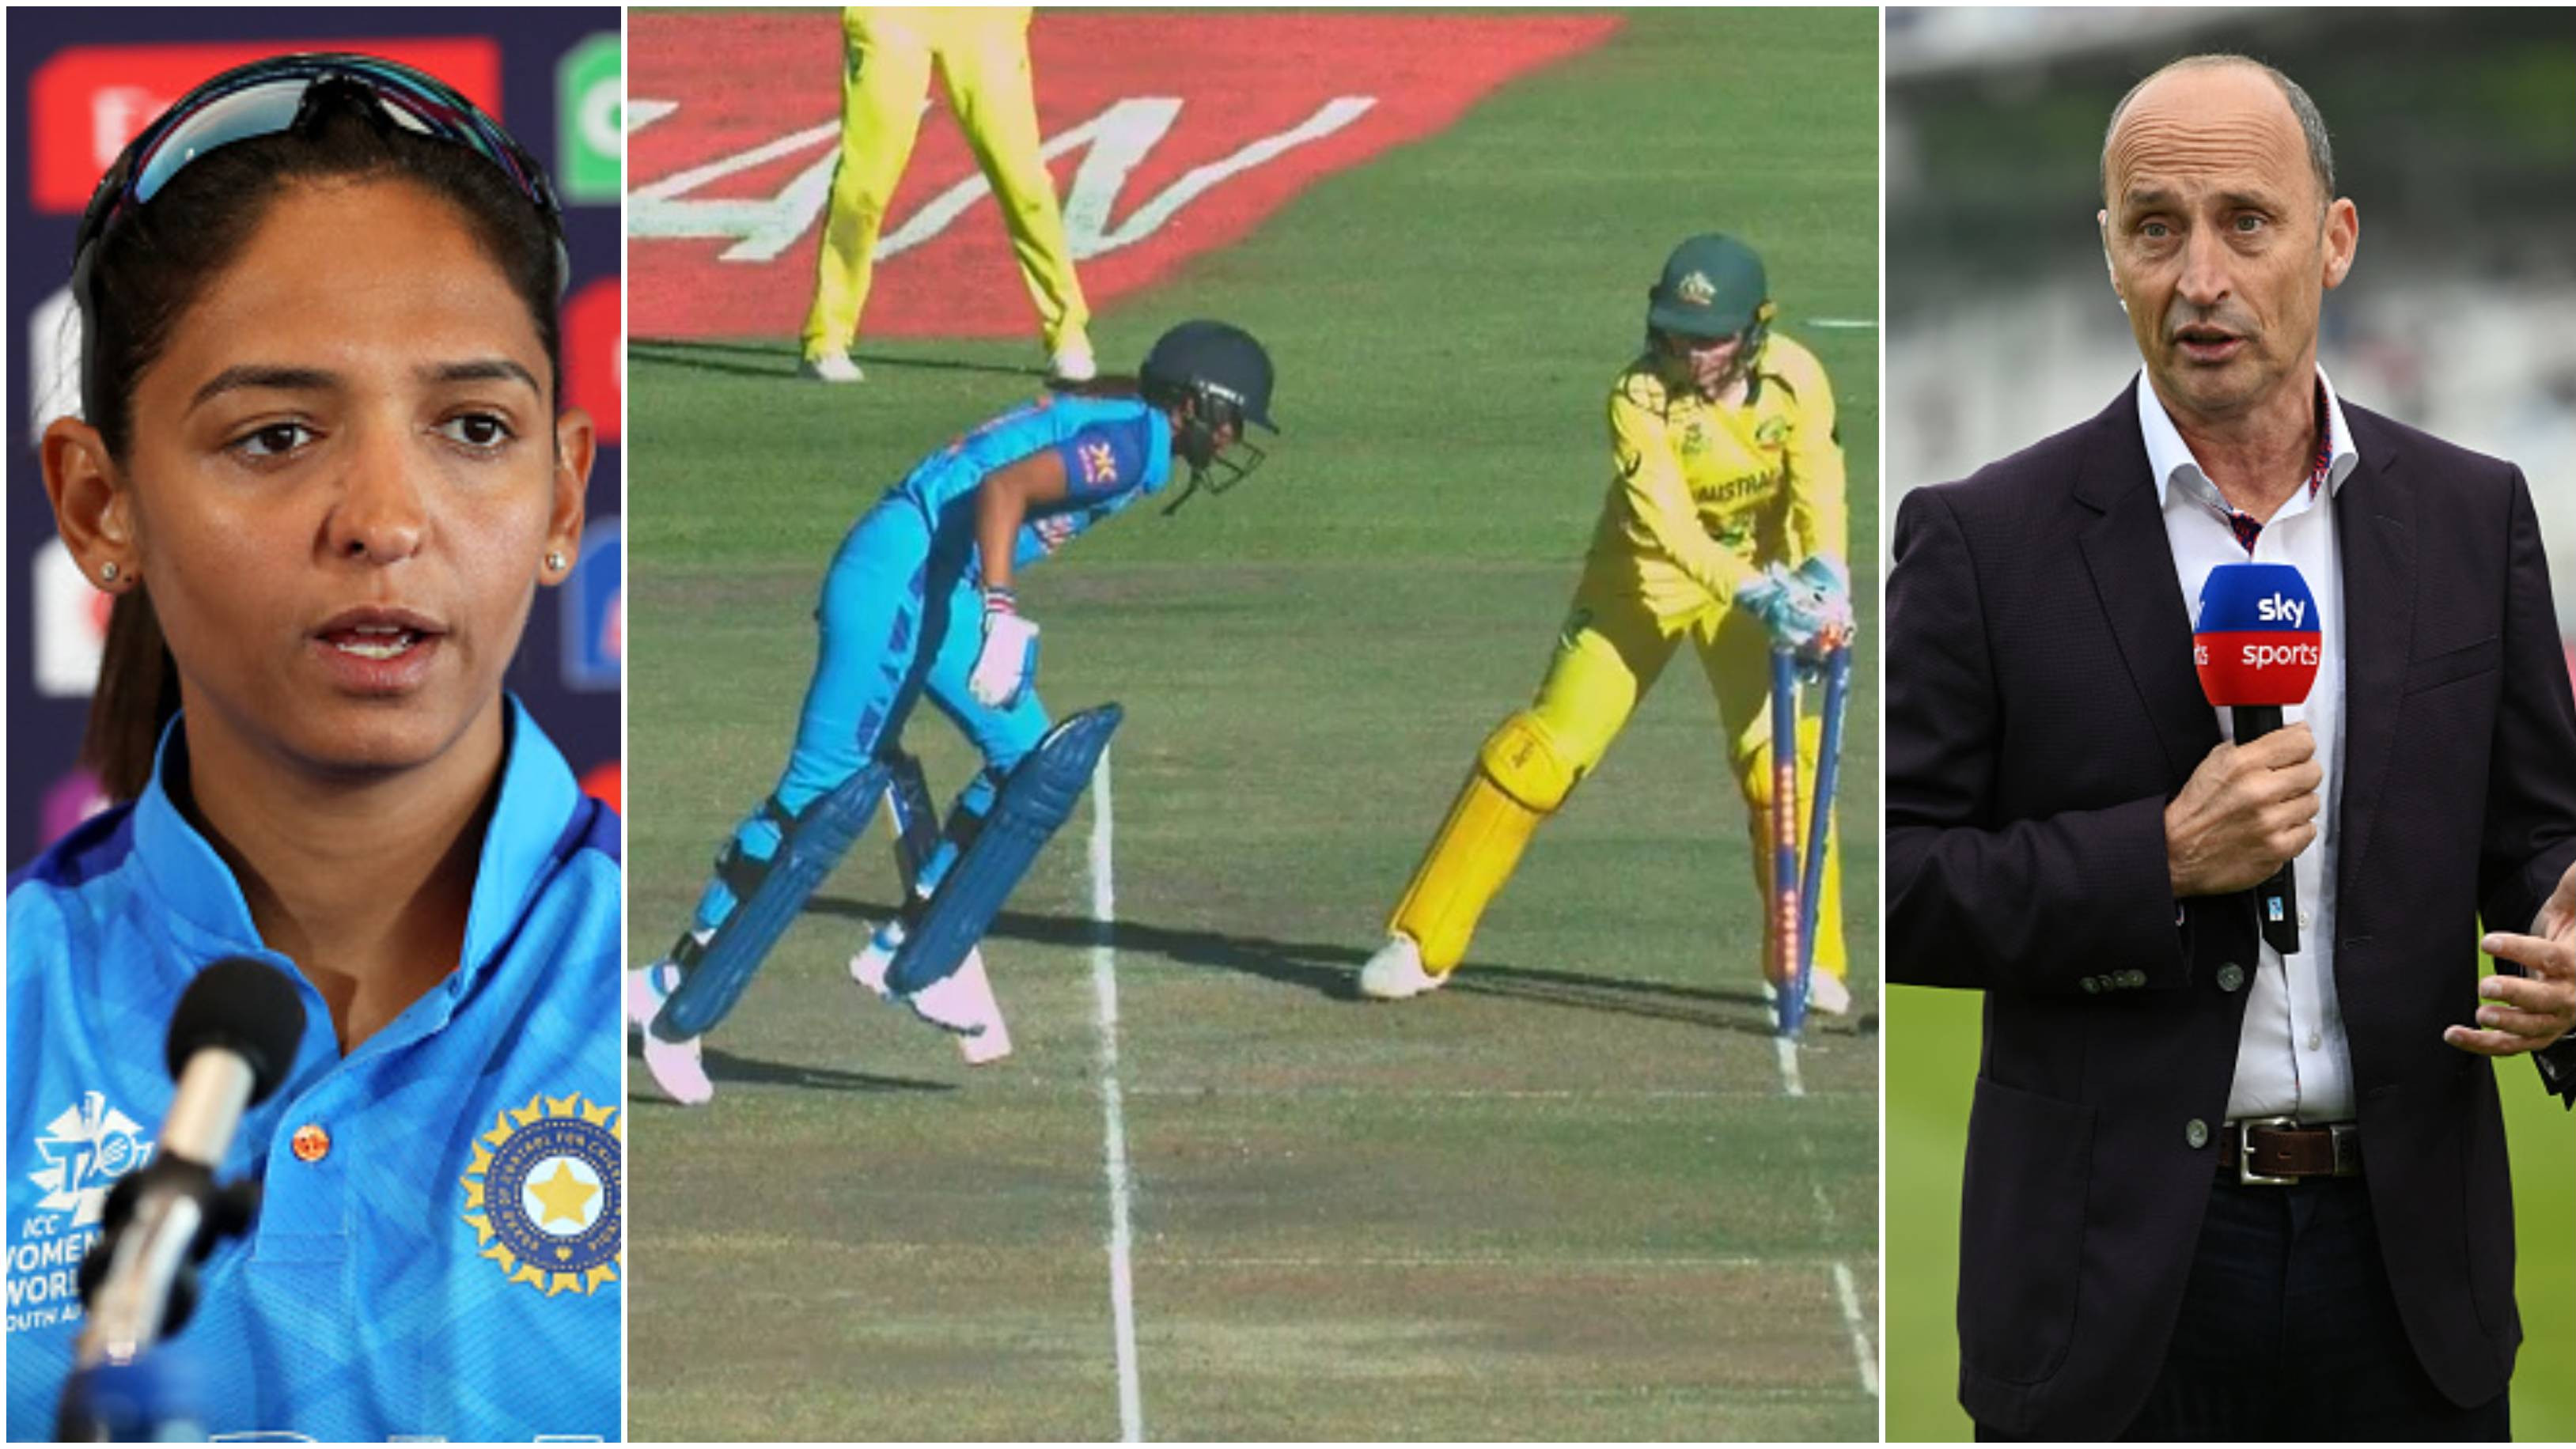 “That’s his way of thinking...”: Harmanpreet reacts to Nasser Hussain’s ‘school girl error’ remark on her run-out in semi-final